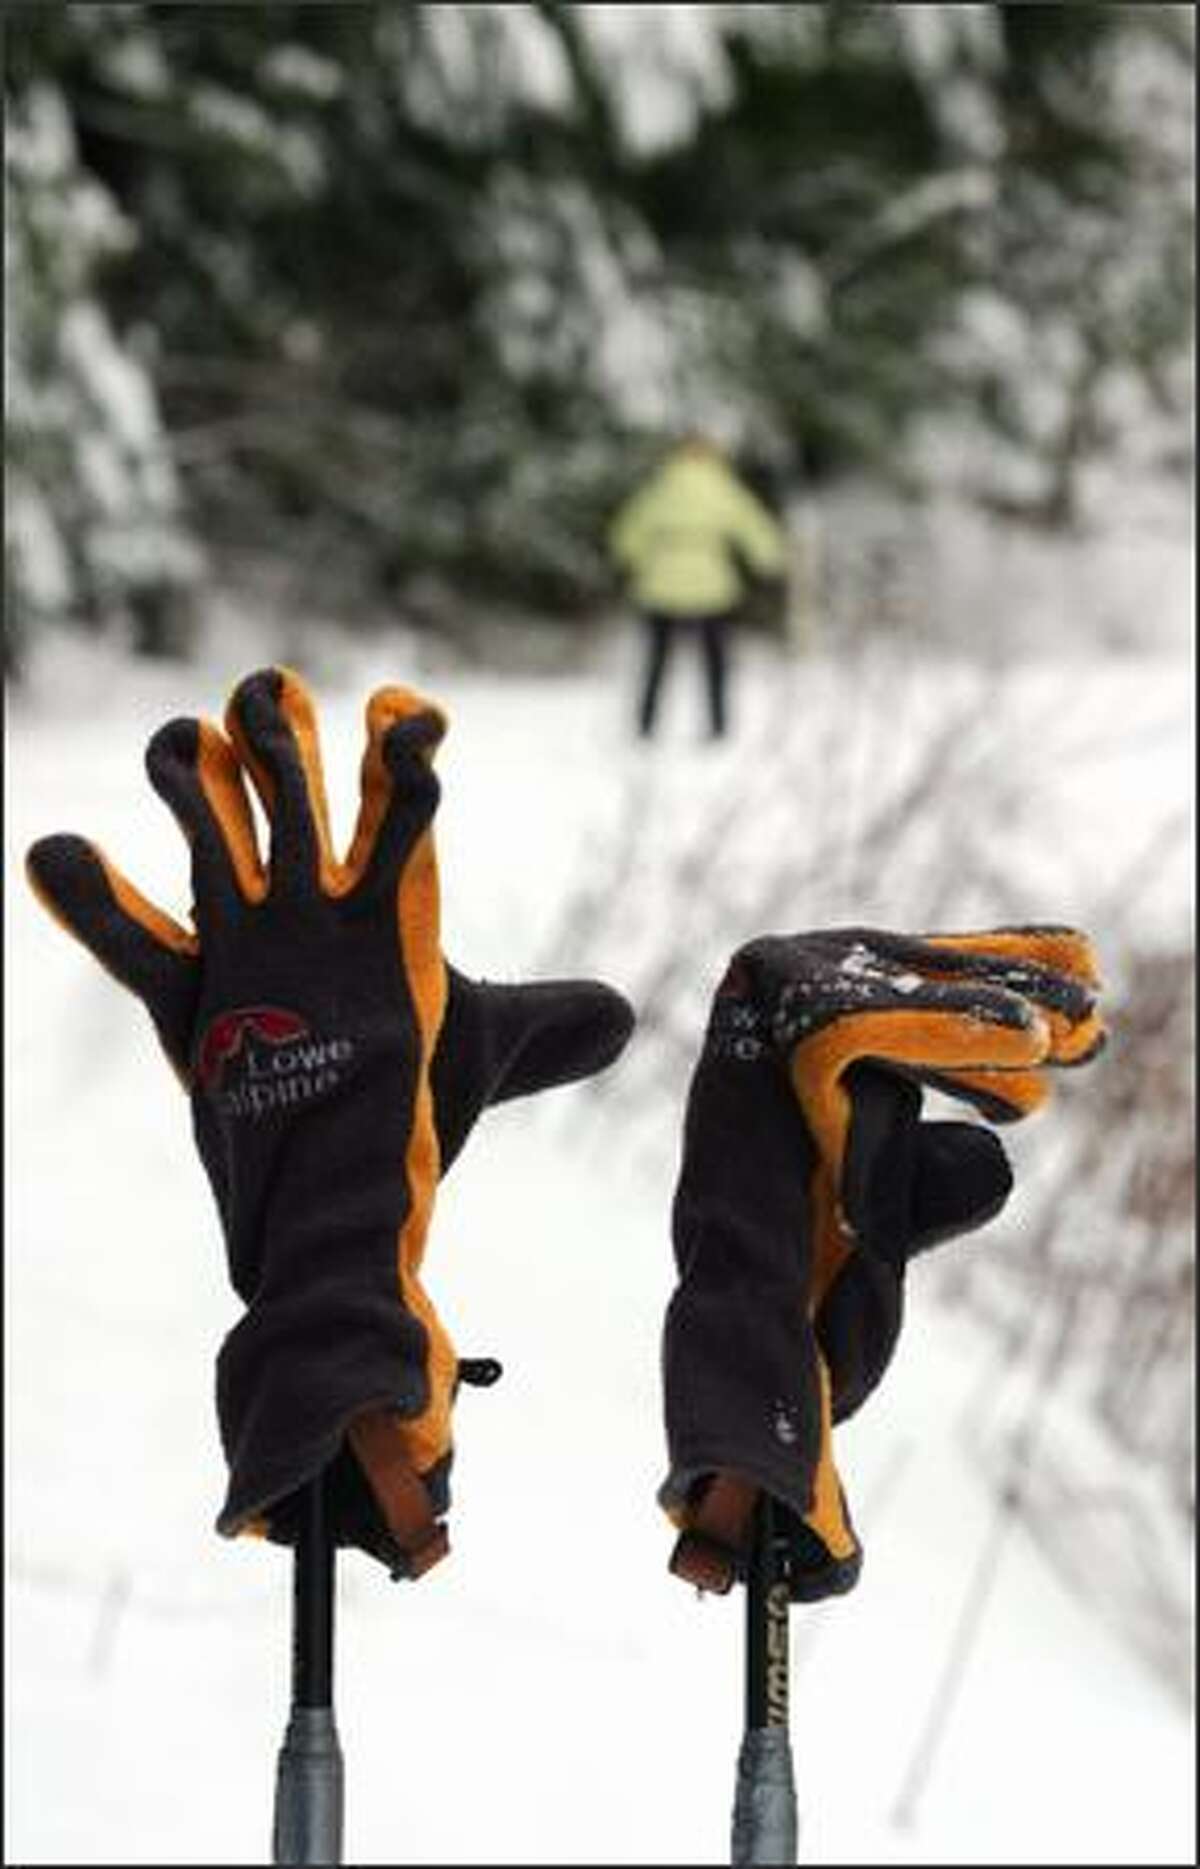 A skier's gloves rest on ski poles during a cross country ski and snow shoe trip with the One World Outing Club near Stevens Pass.